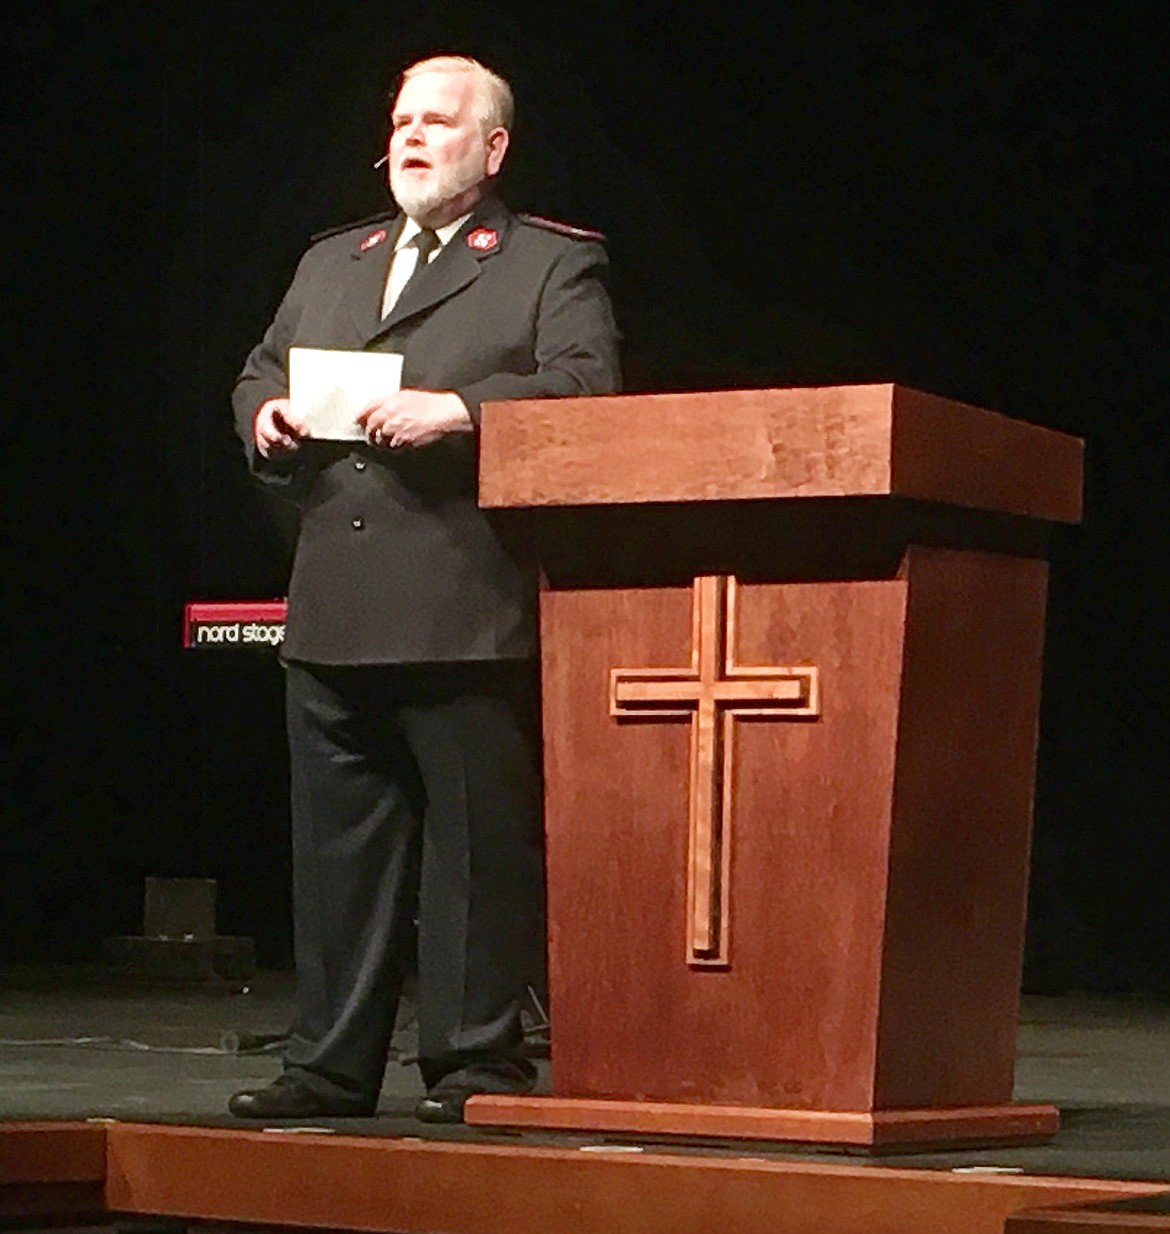 BILL BULEY/Press
Major Don Gilger with The Salvation Army speaks during Sunday’s service at the Kroc Center.